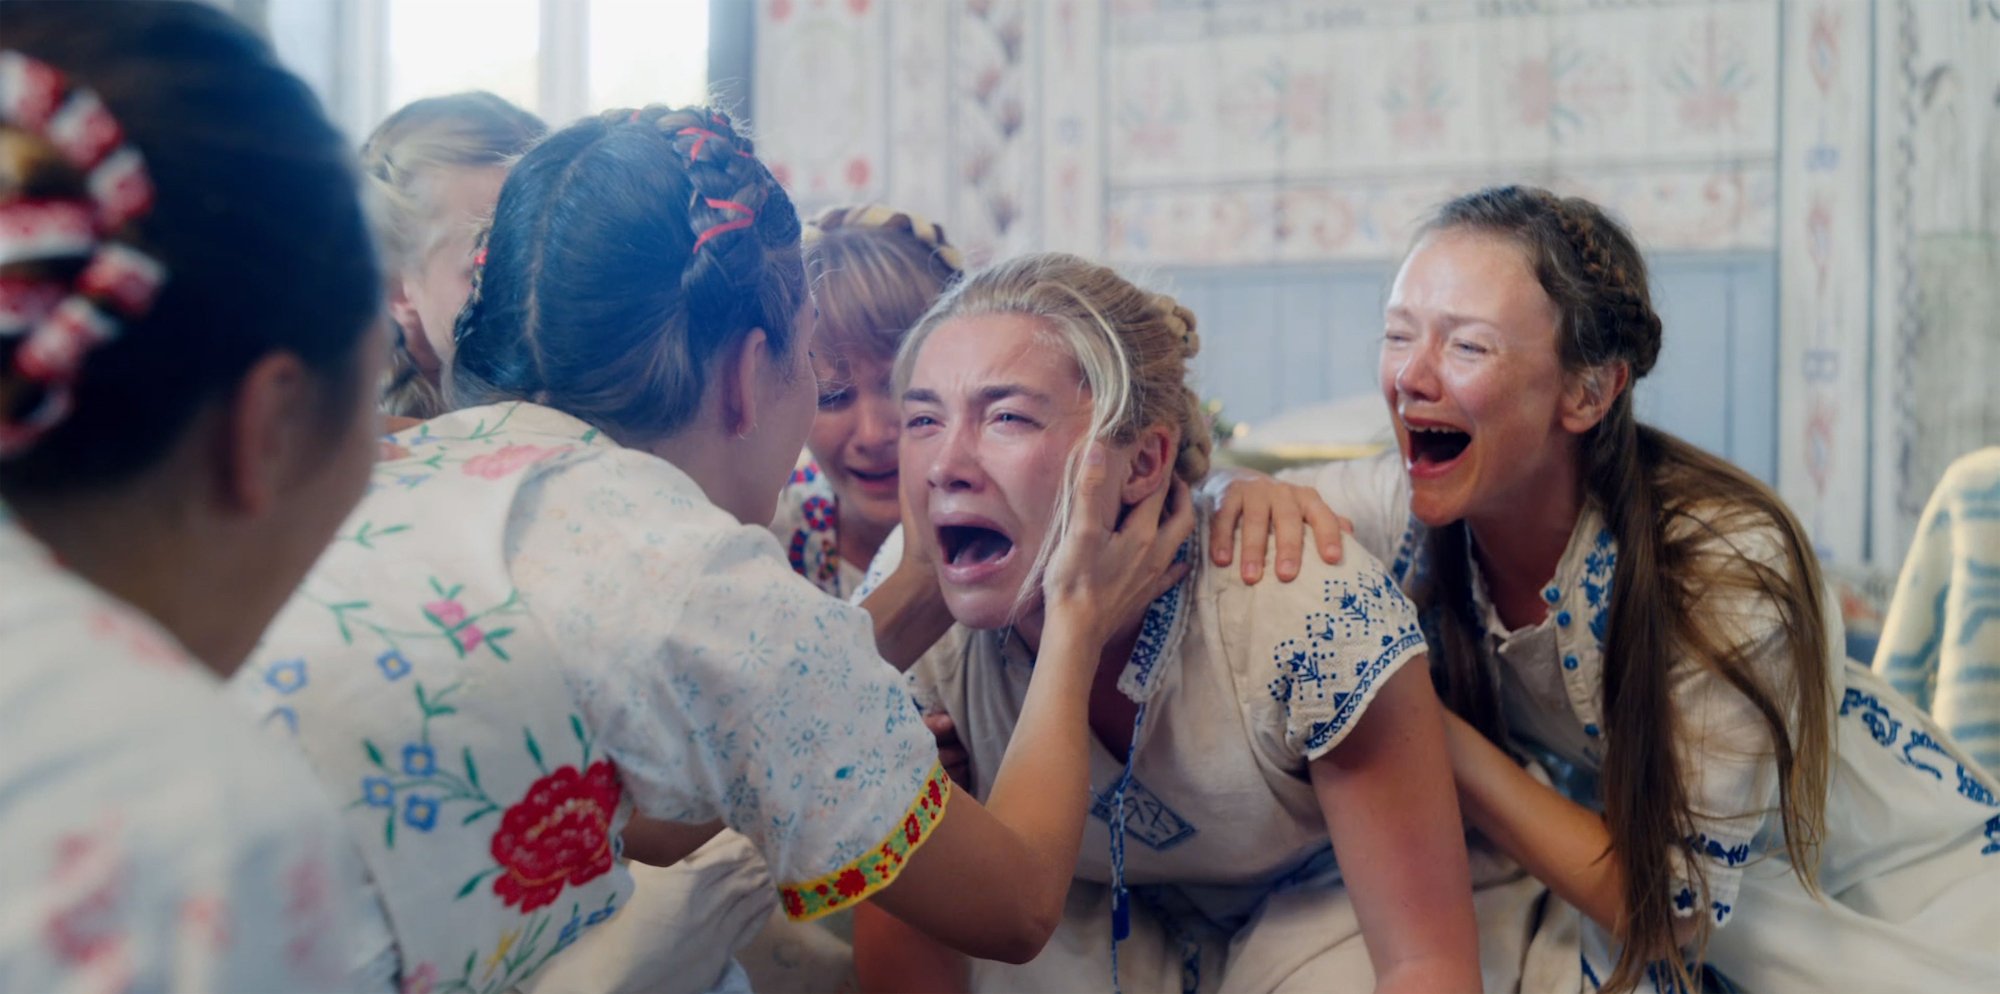 'Midsommar' Florence Pugh as Dani screaming and crying surrounded by other women imitating her screaming and crying